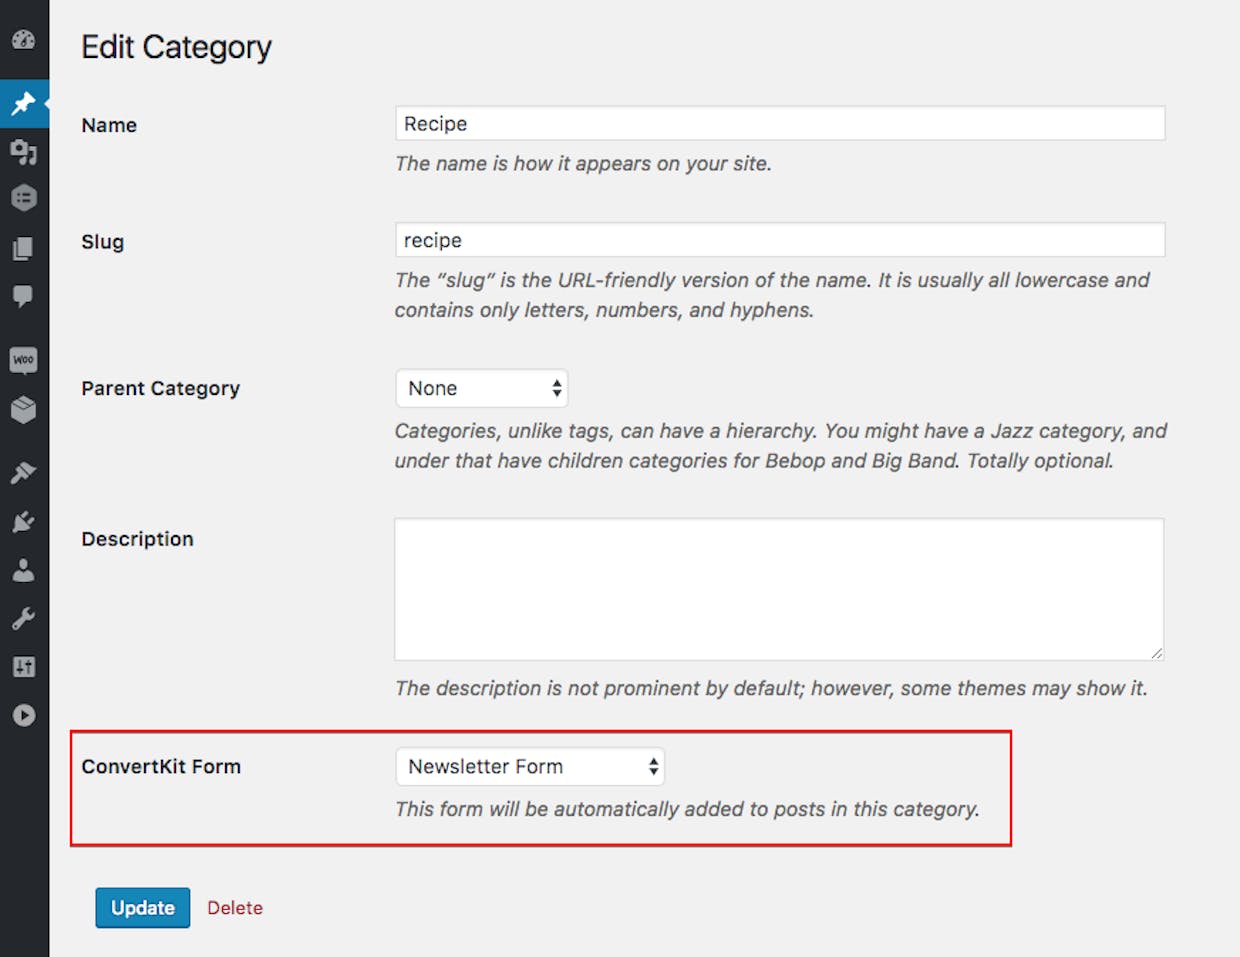 Convertkit inline form not displaying on Wordpress Posts. Only displays on Wordpress Pages
